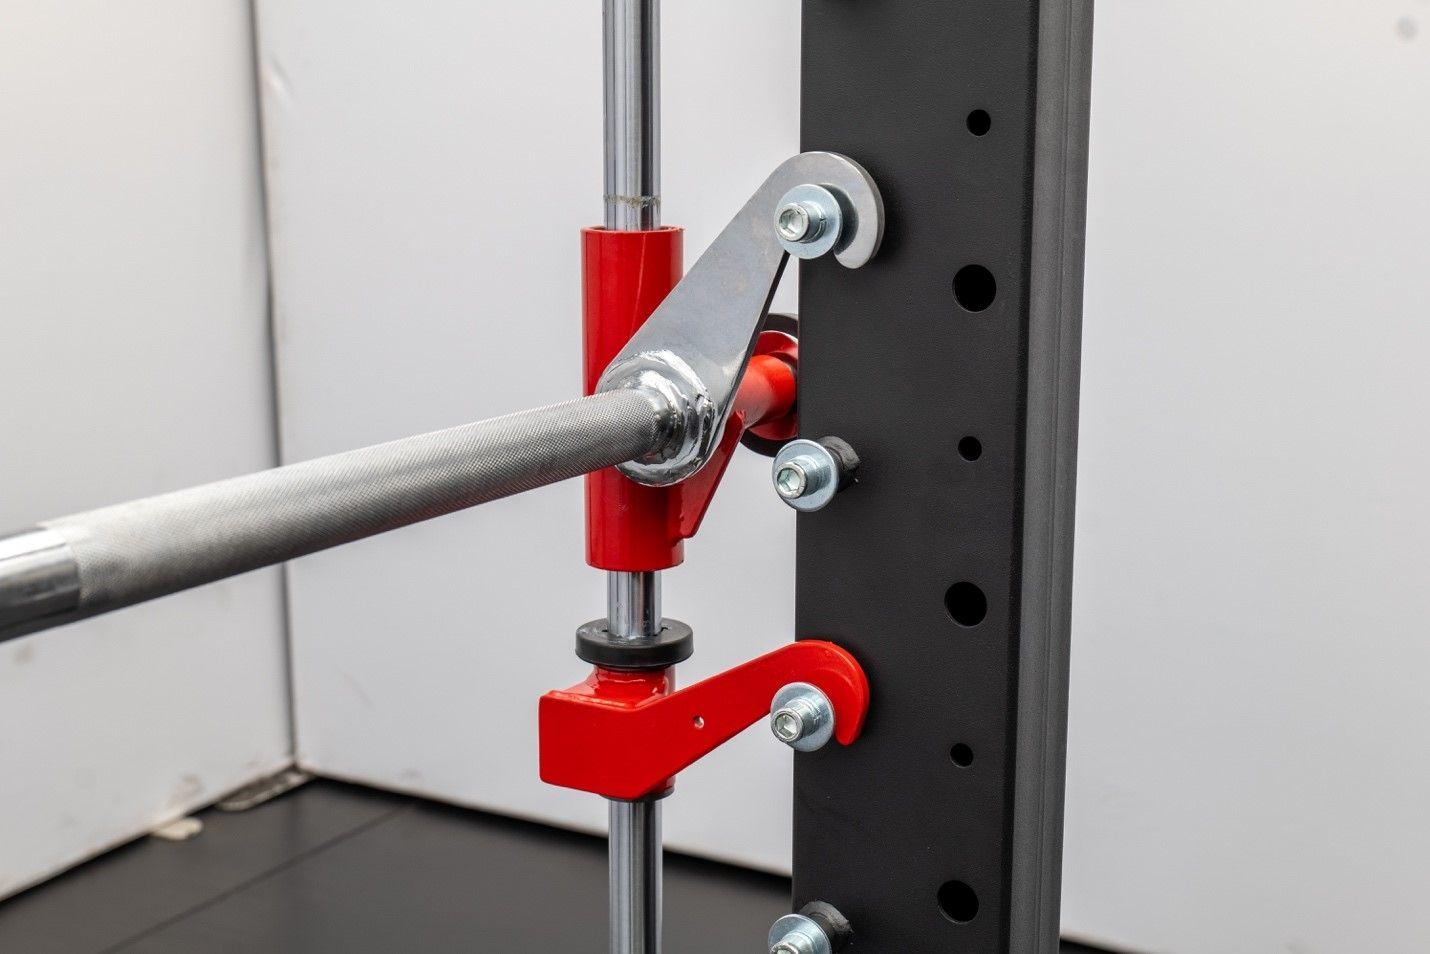 Smith machine with safety spotters